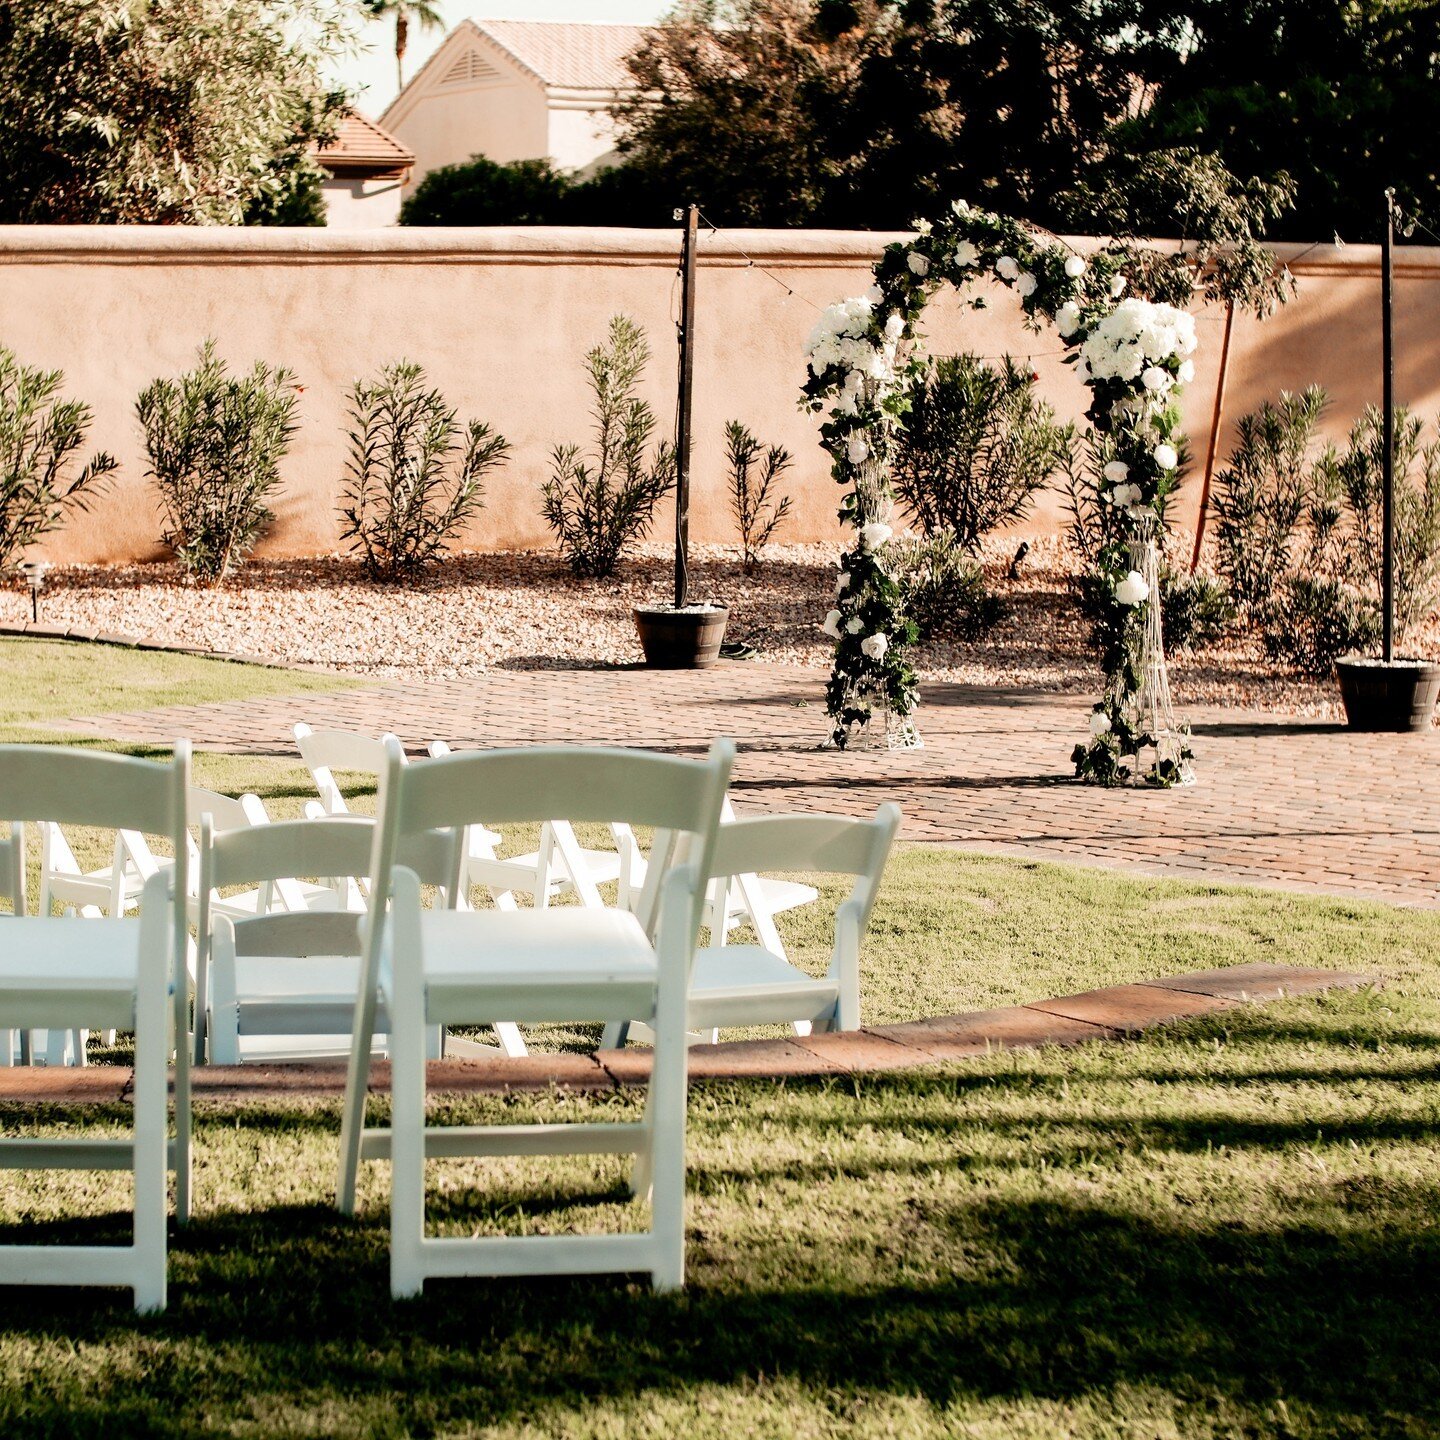 Our venue in the heart of the East Valley is a charming spot for celebrations. We have a stylish and creative indoor area with a modern garage door. Meanwhile, our outdoor amphitheater and patio are perfect for golden hour photos. Press release link 